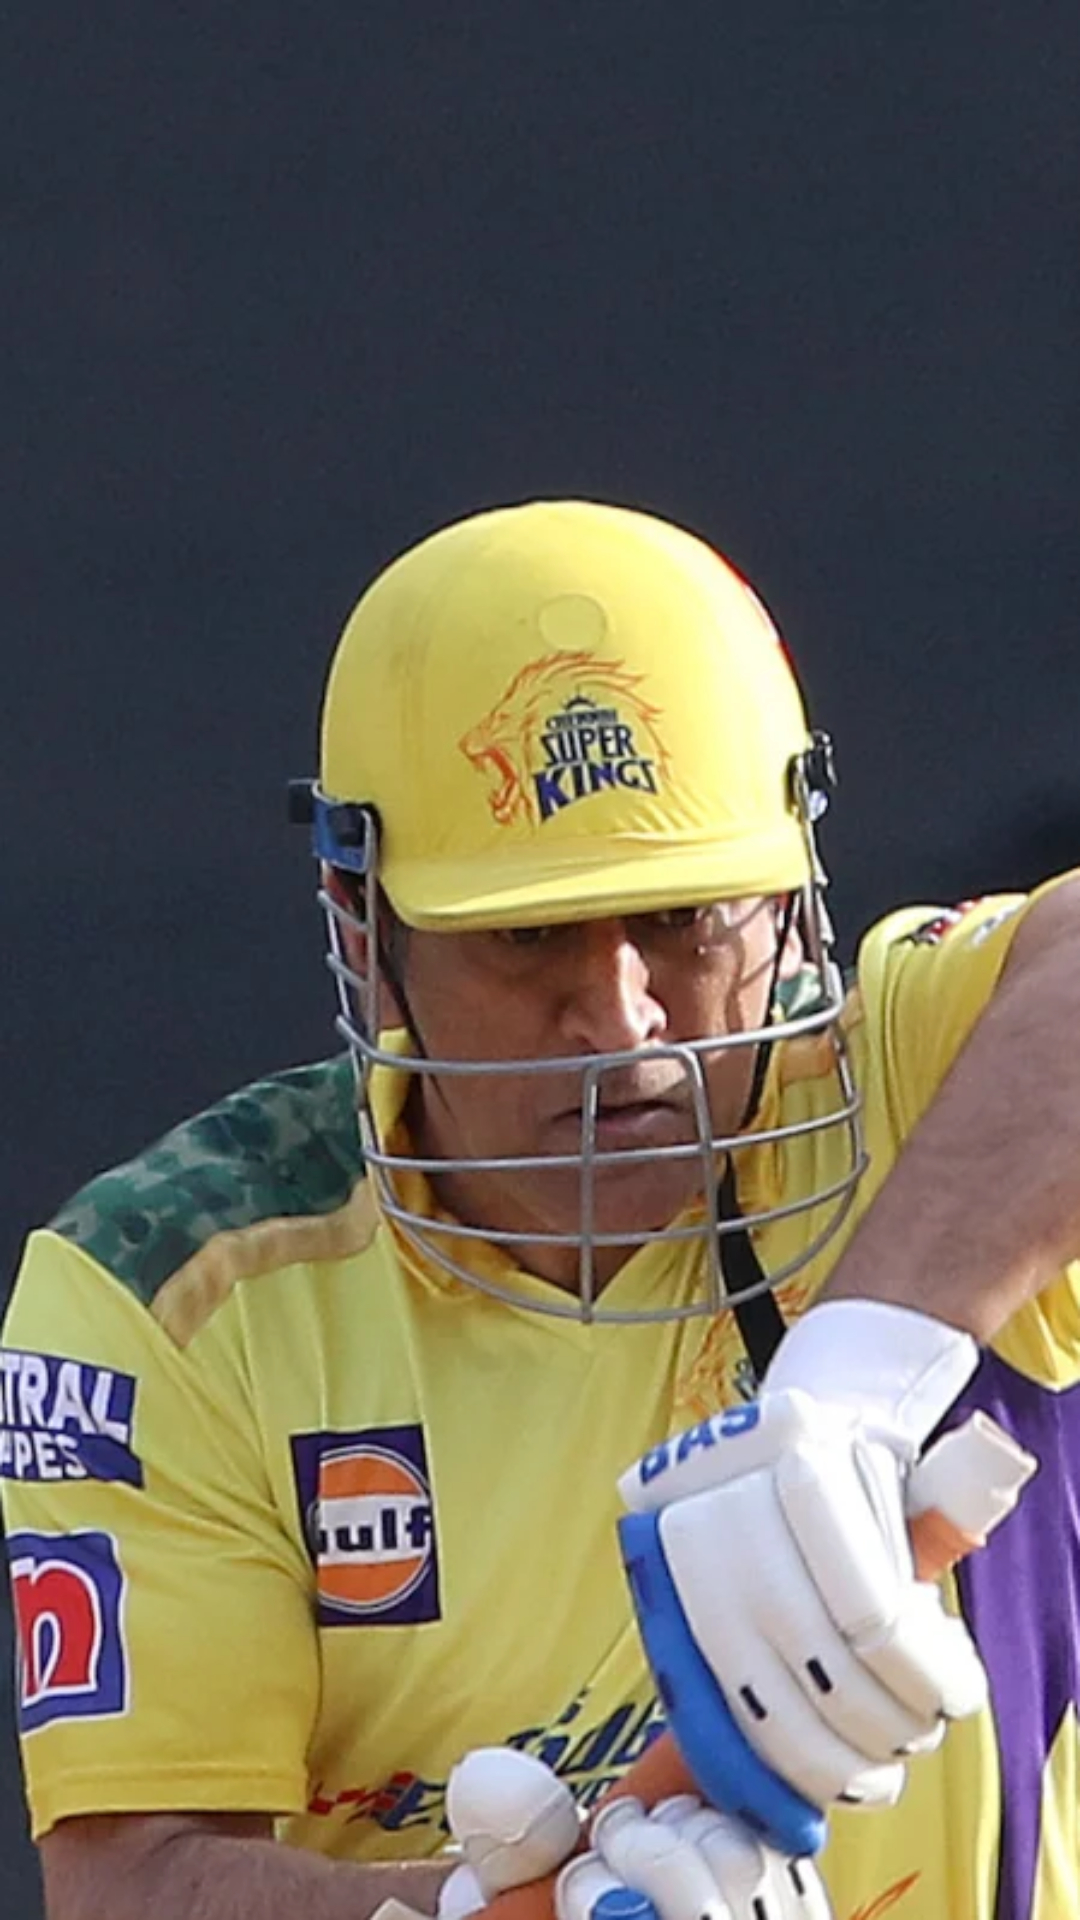 MS Dhoni vs spinners: A look at CSK skipper's record ahead of IPL 2023